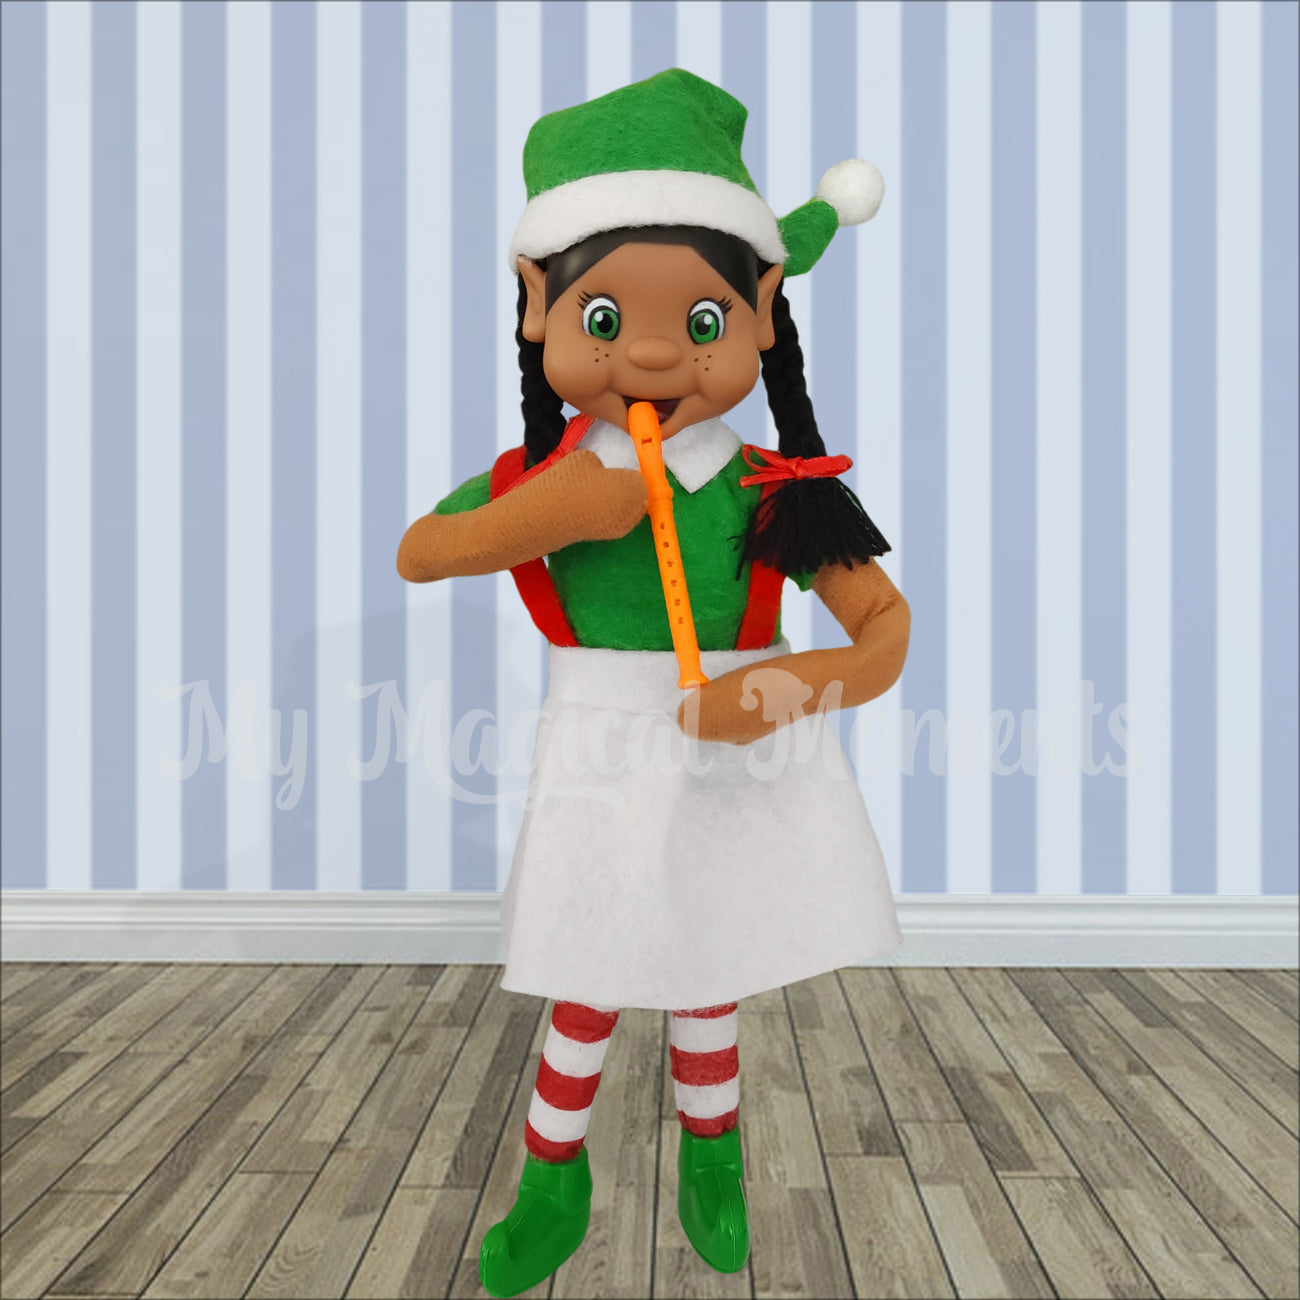 My elf friend standing and playing an orange recorder